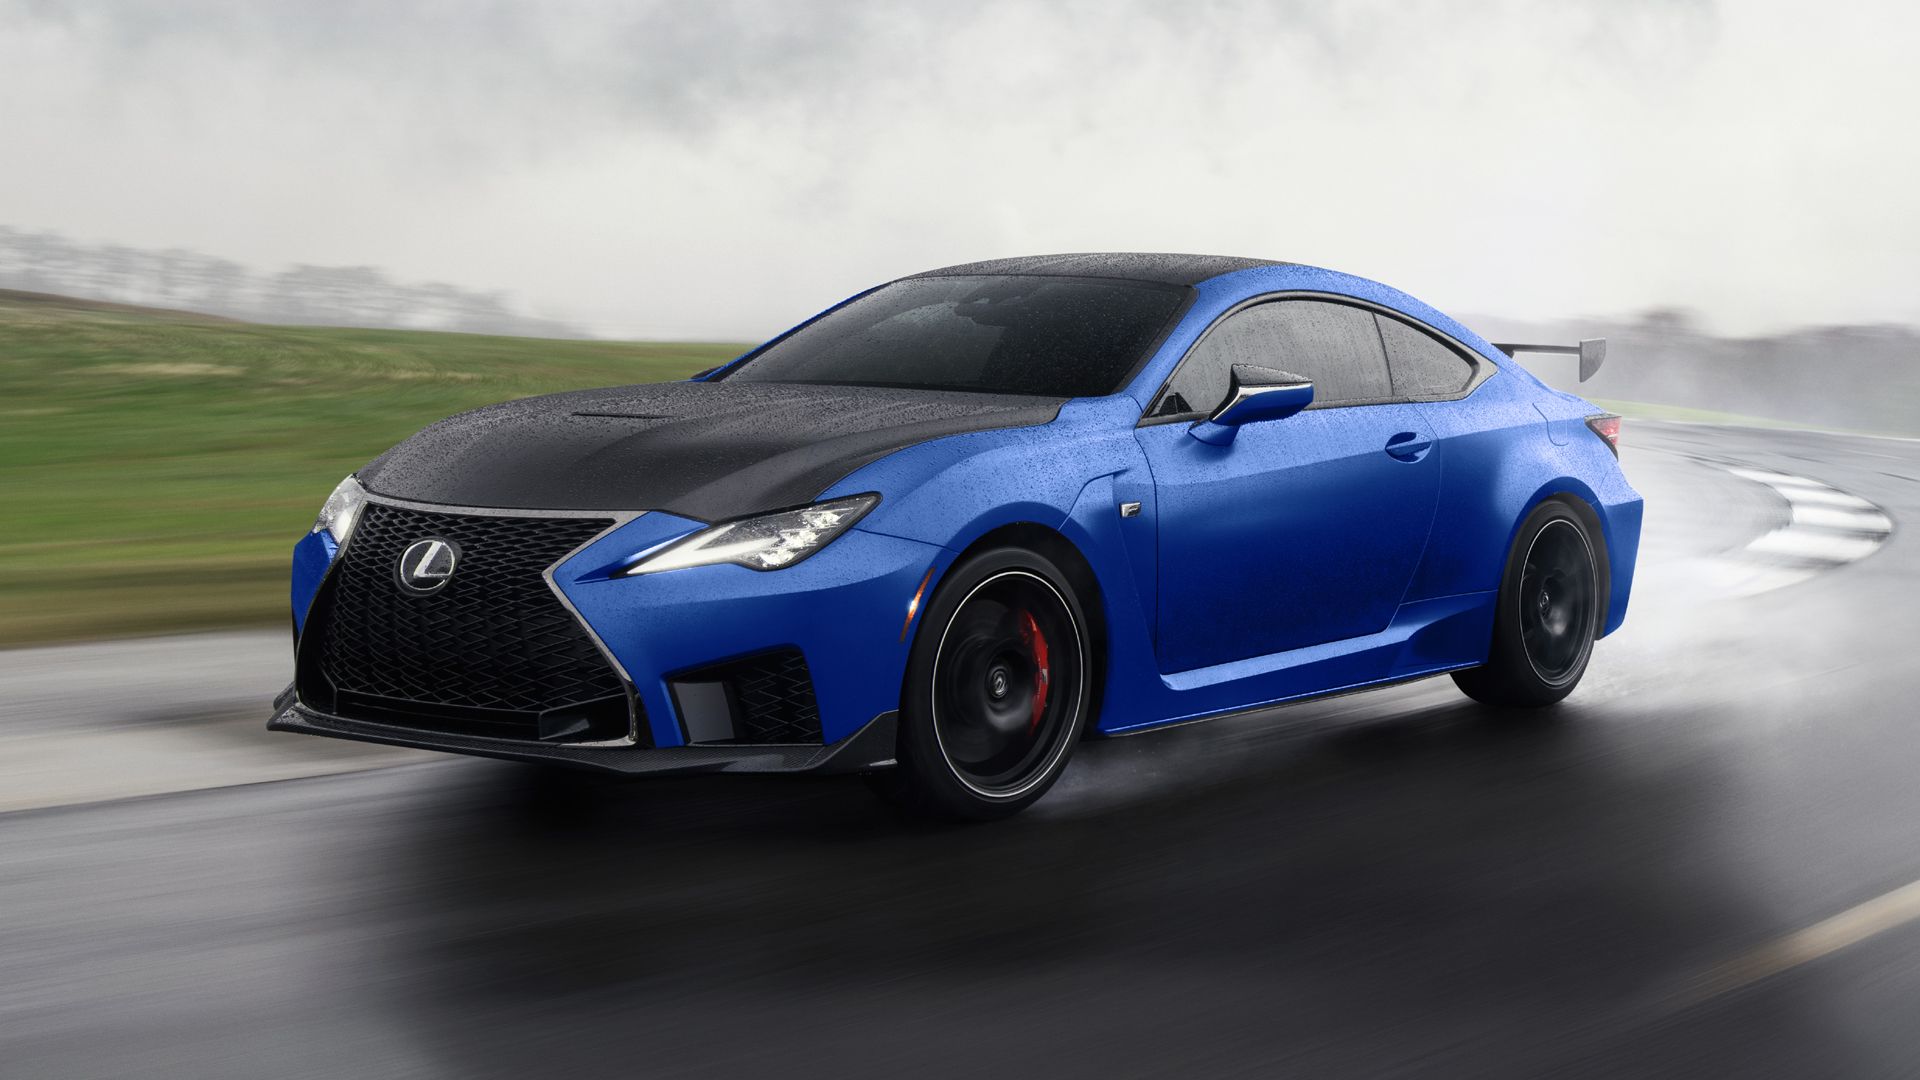 Blue V8-powered 2022 Lexus RC-F Fuji Speedway Edition in action, on the road